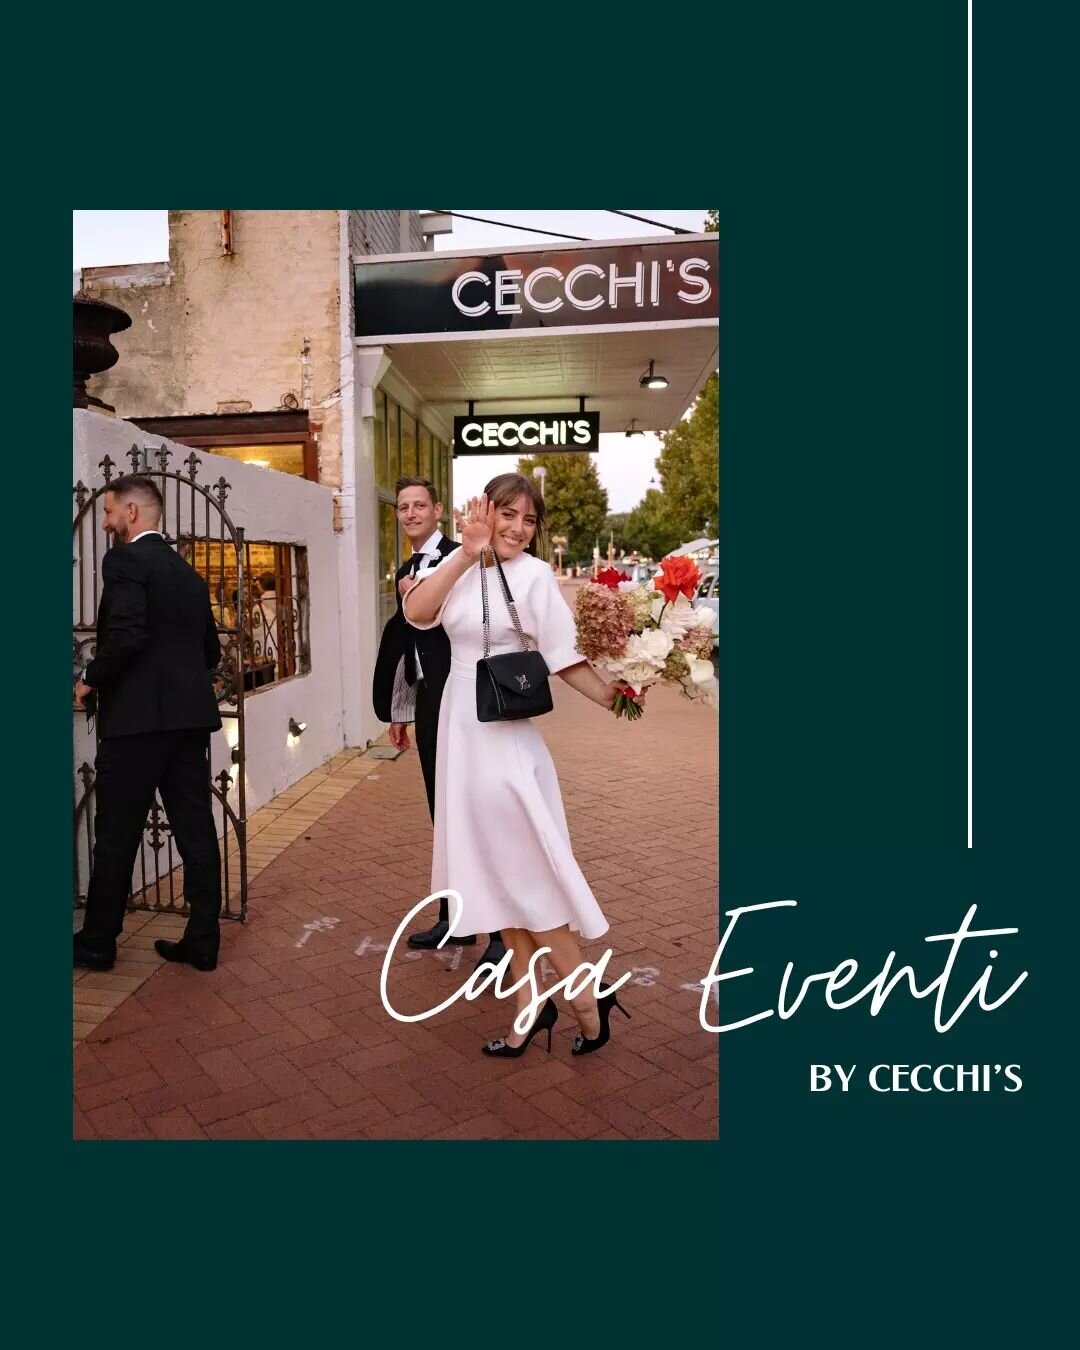 Presentando Casa Eventi!&nbsp;🌹 

Welcome to our neighbourhood event space! Casa Eventi is nestled in our old location at 965 Beaufort Street, Inglewood.

You can expect the same delicious Italian fare and delectable beverages from our location acro